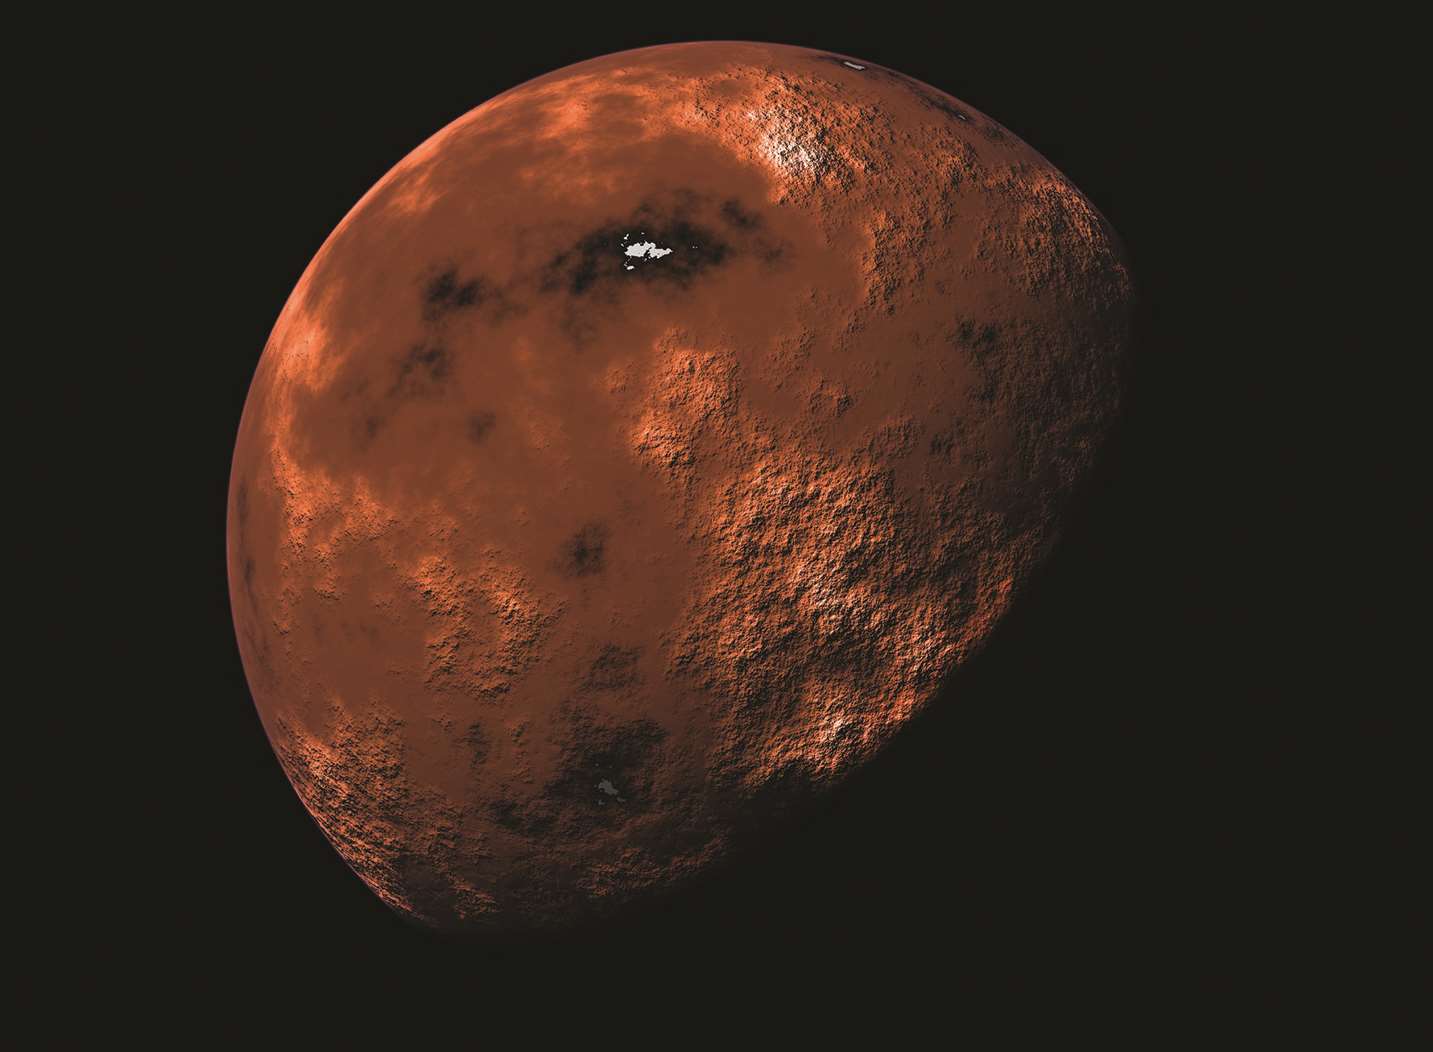 Mars has a crater named Maidstone